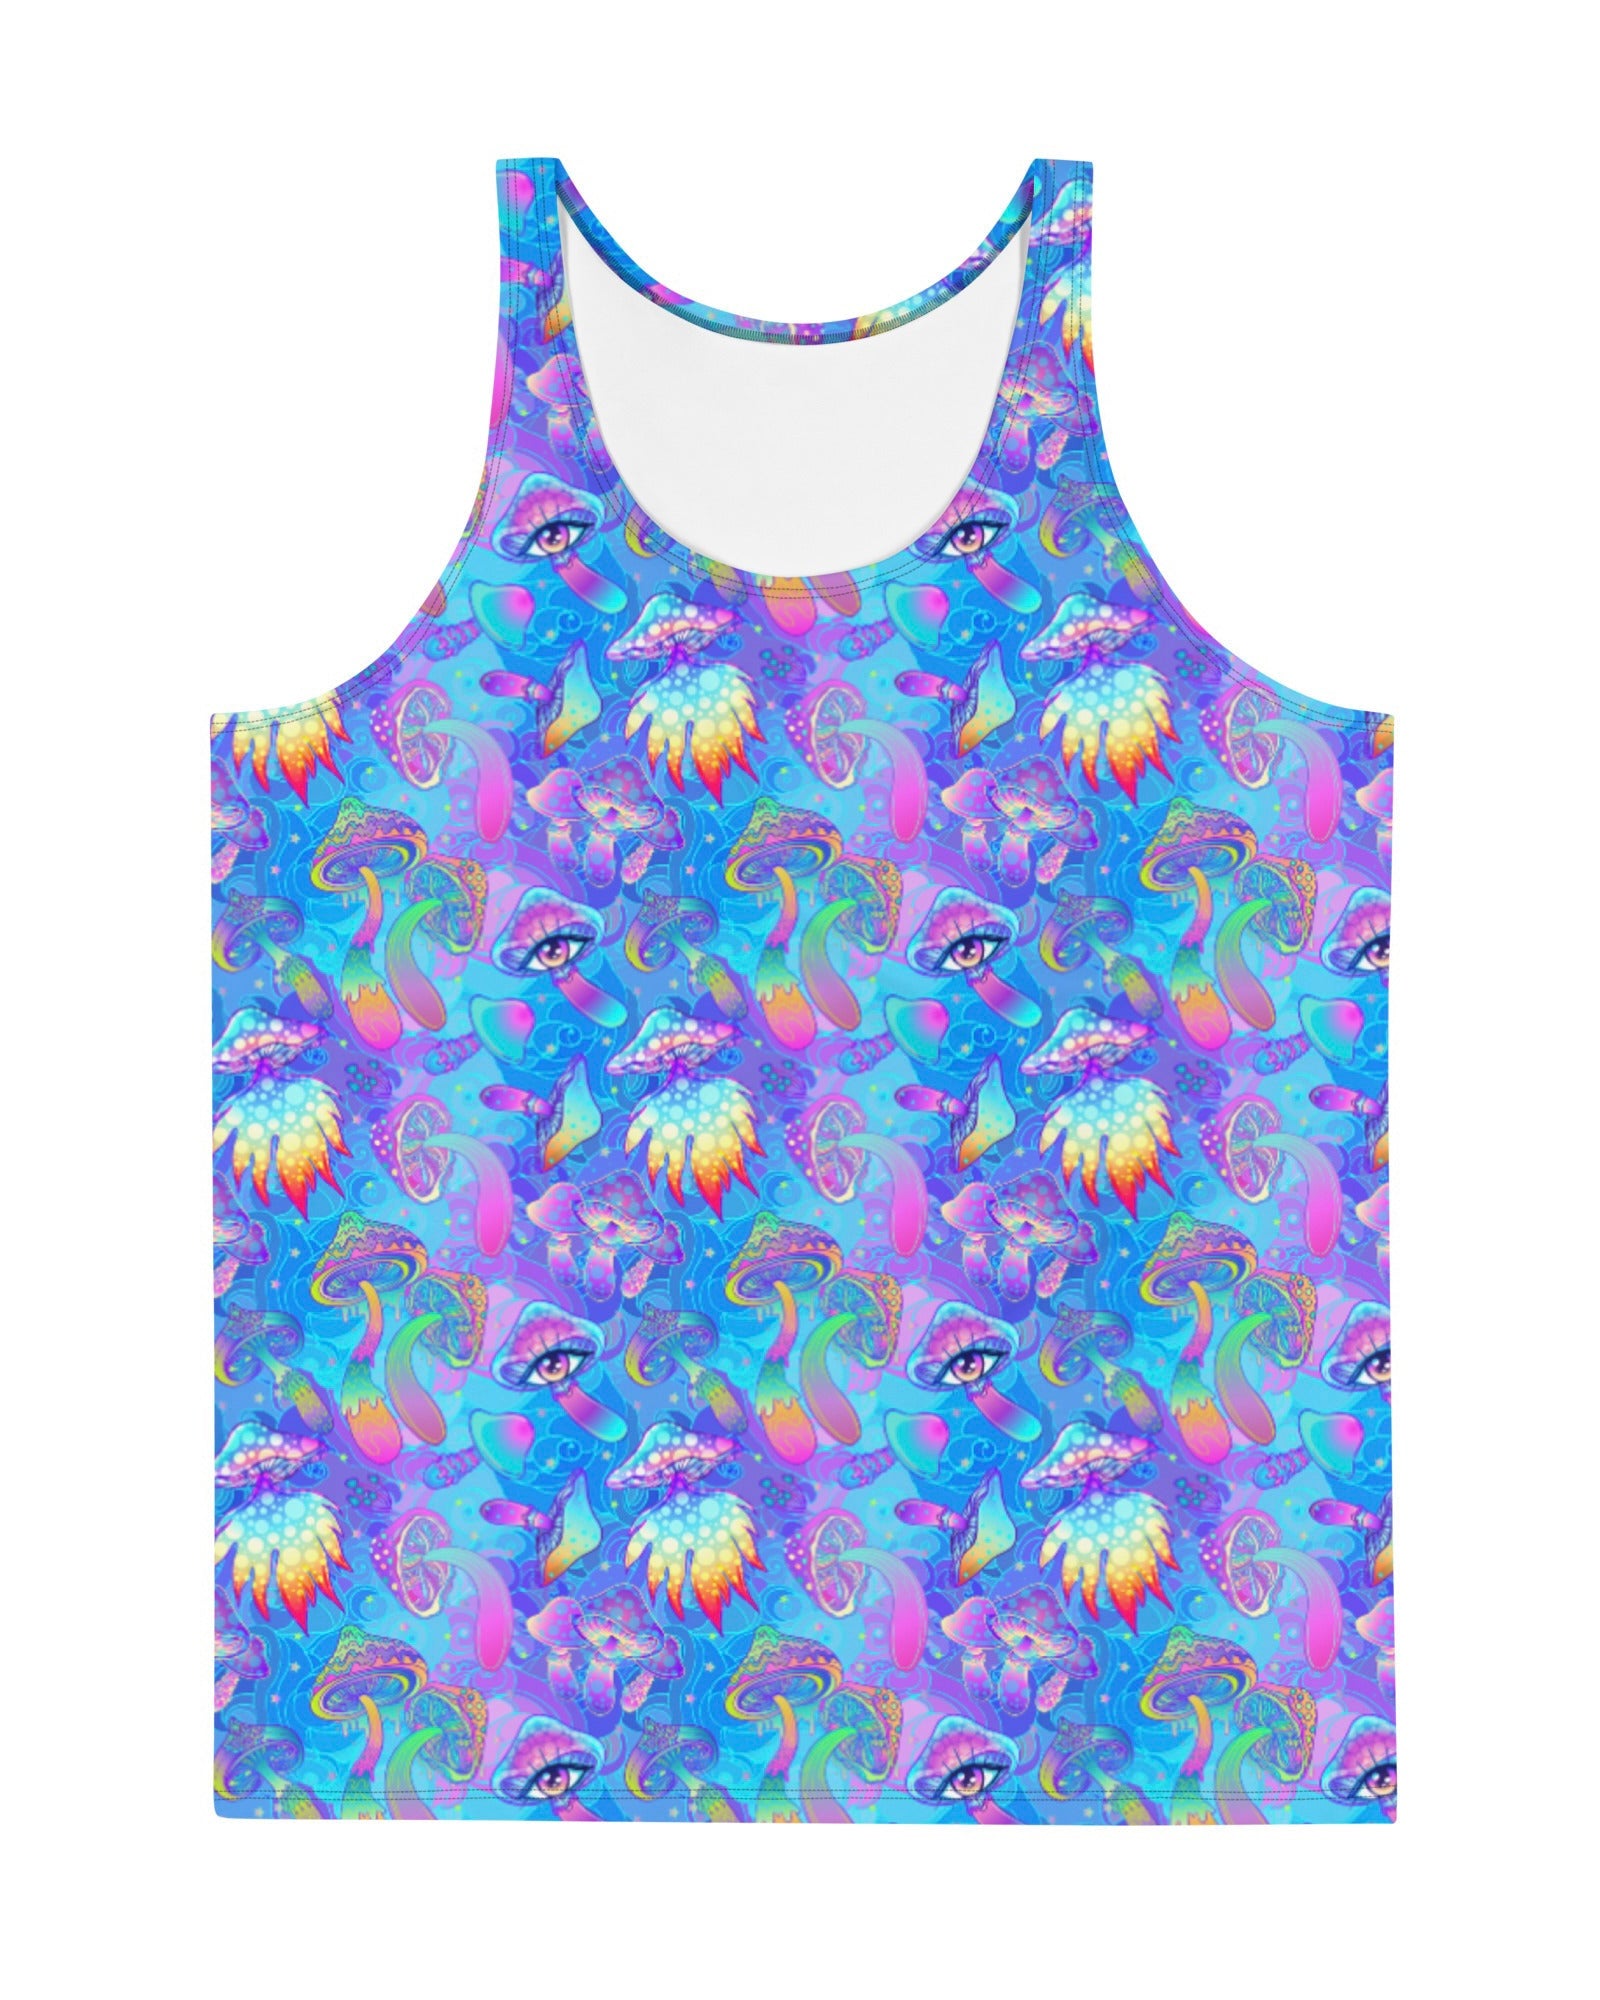 Shroomin Blue Tank Top, Tank Top, - One Stop Rave